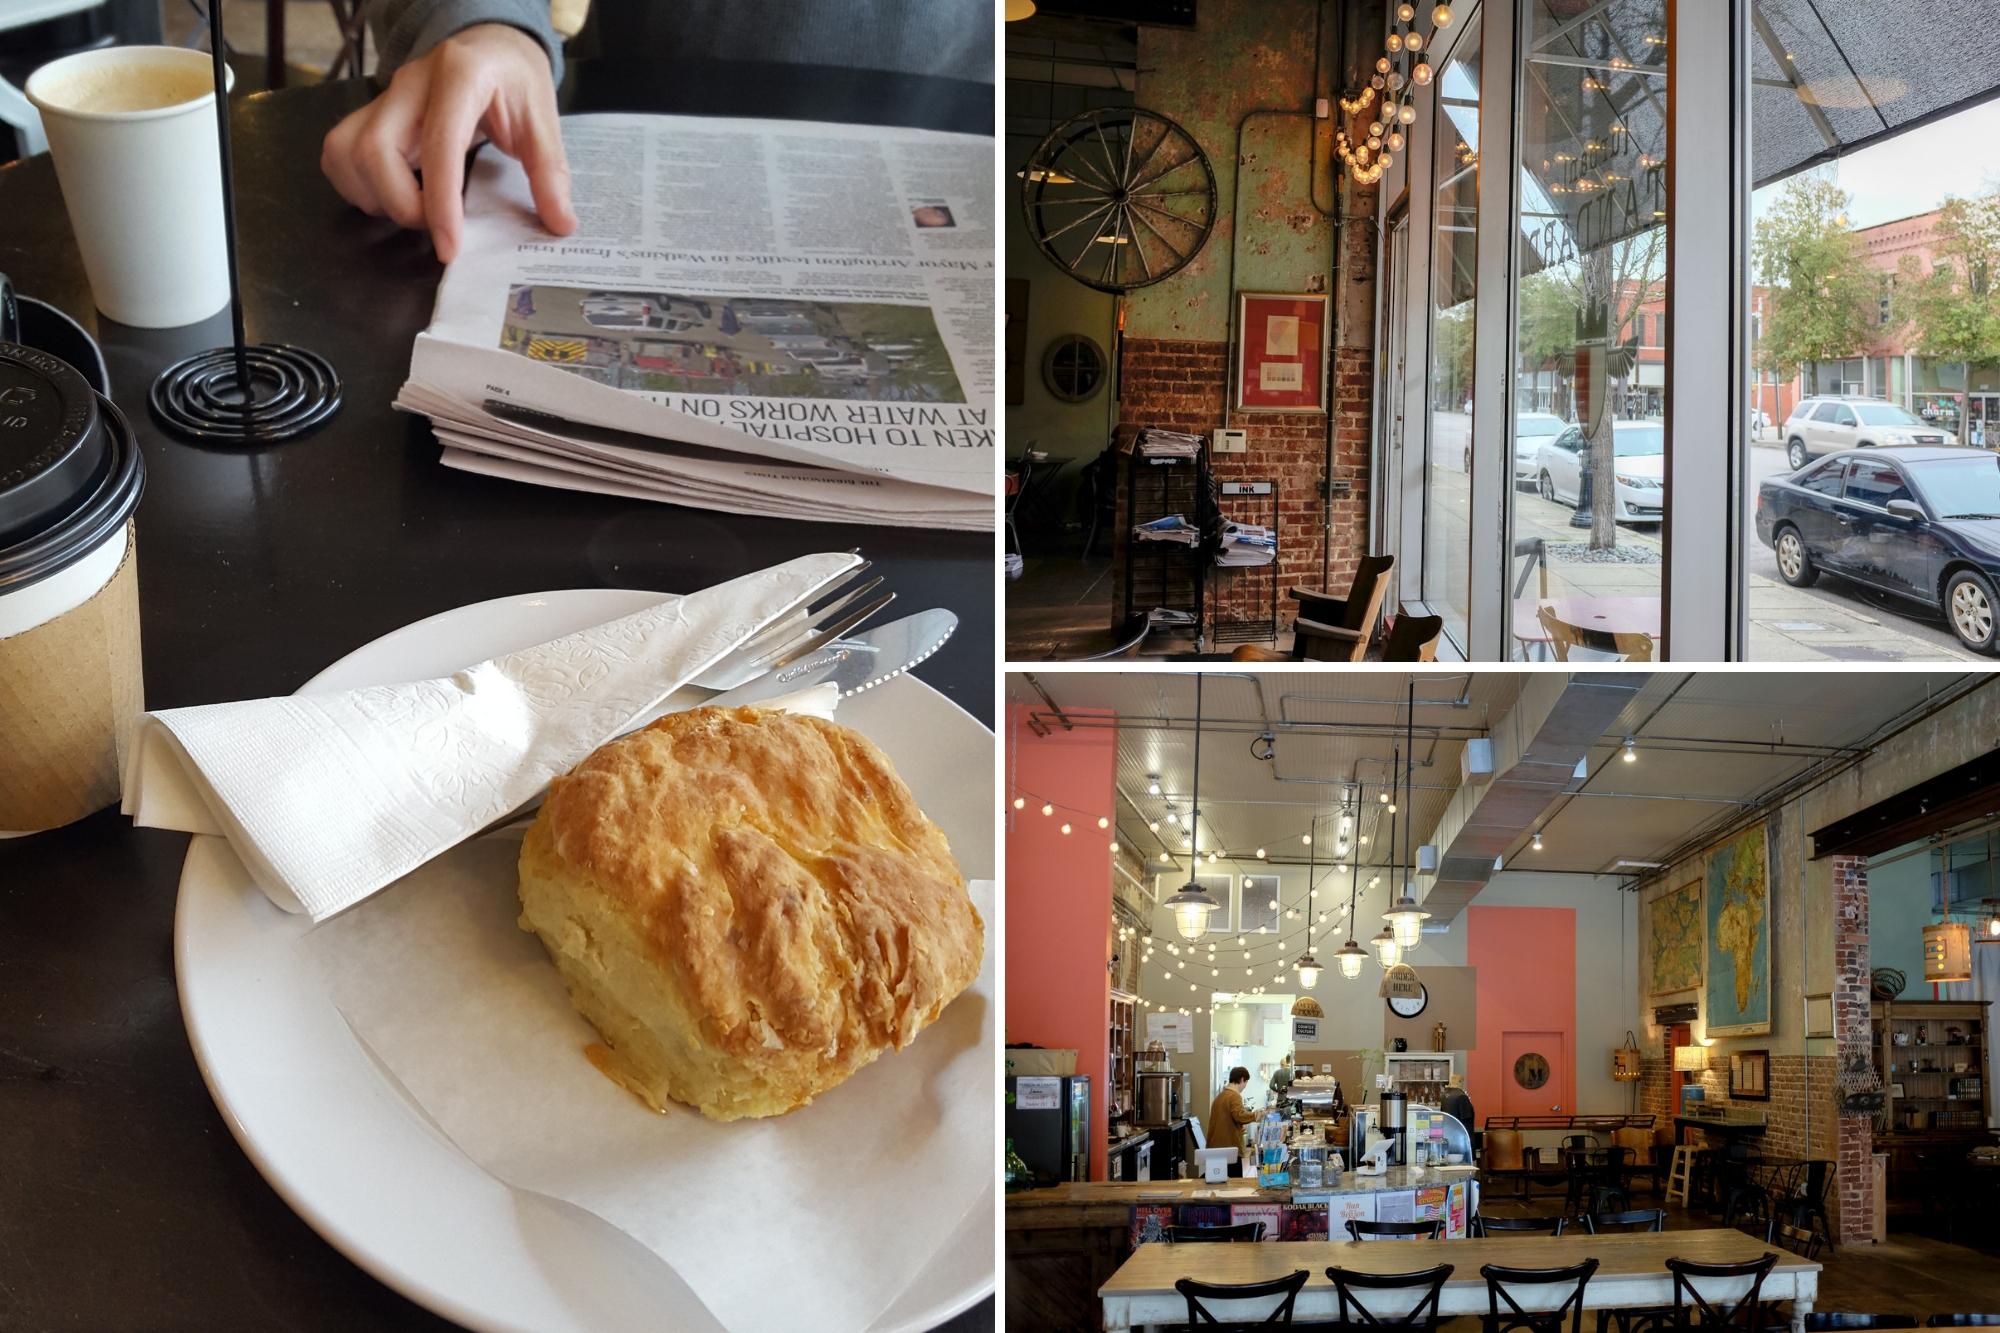 collage: biscuit and newspaper at urban standard, and restaurant interior